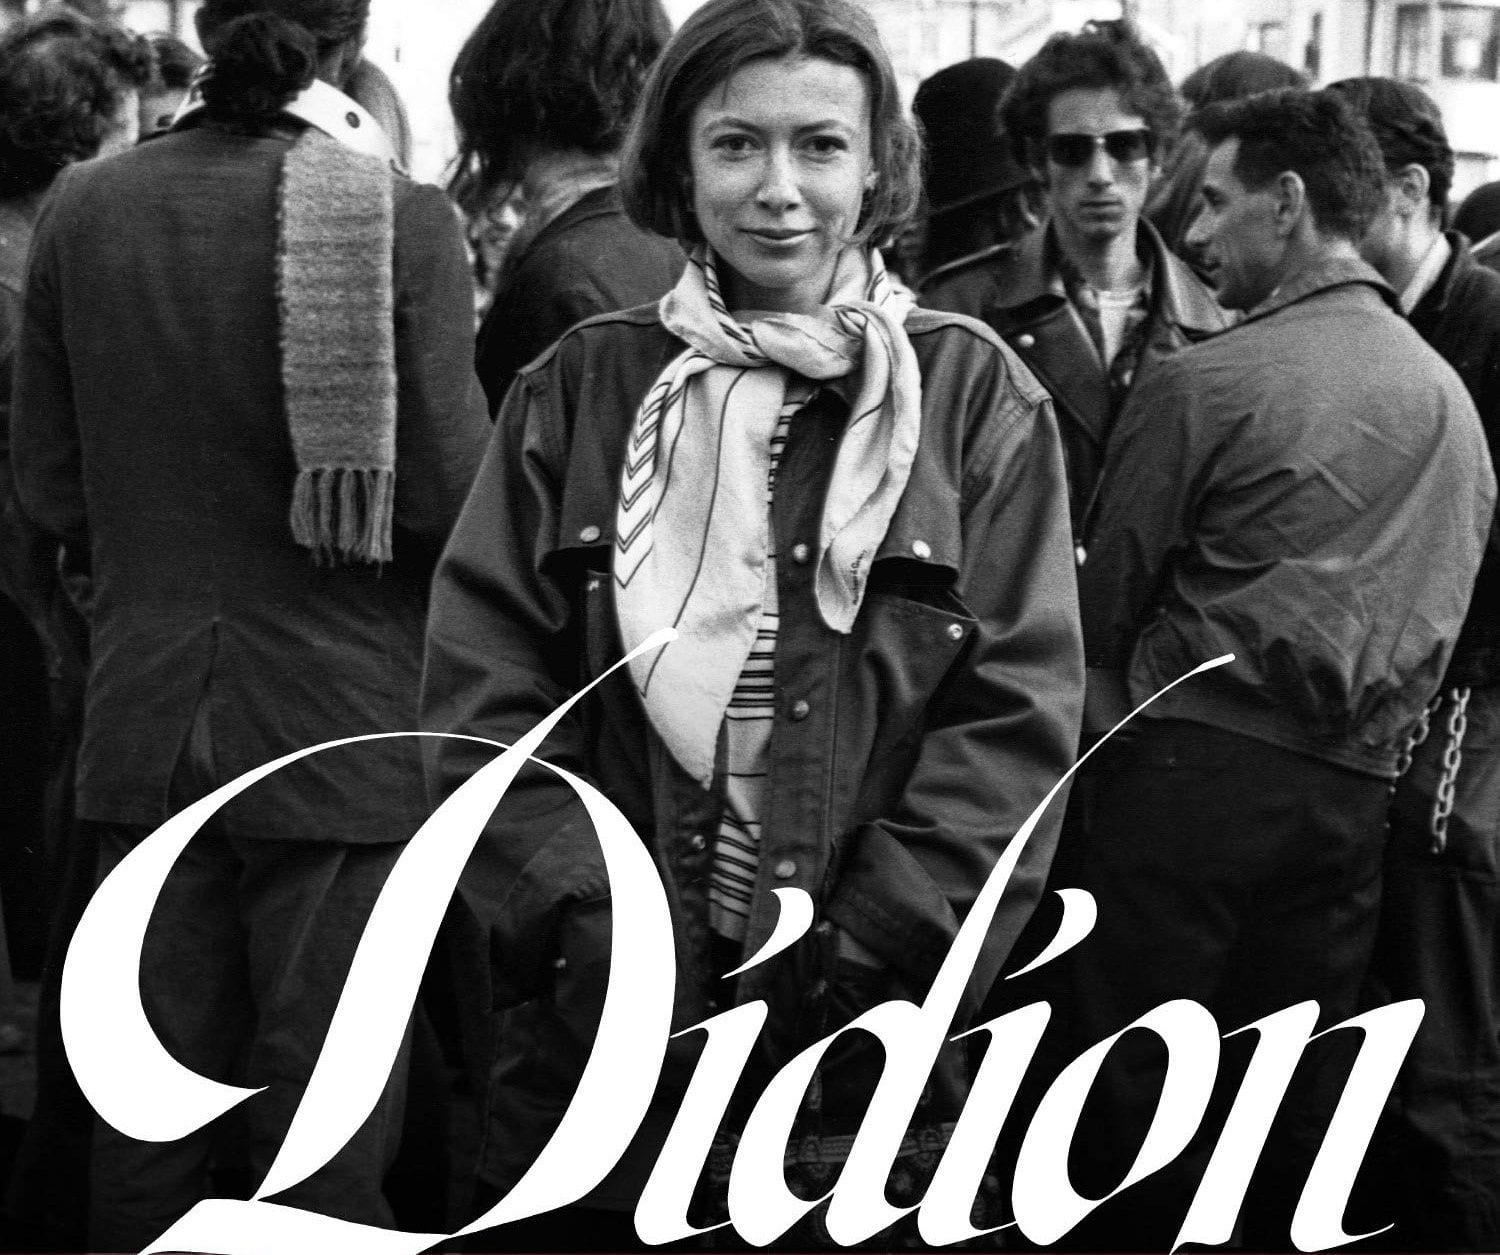 Joan Didion the 1960s-70s